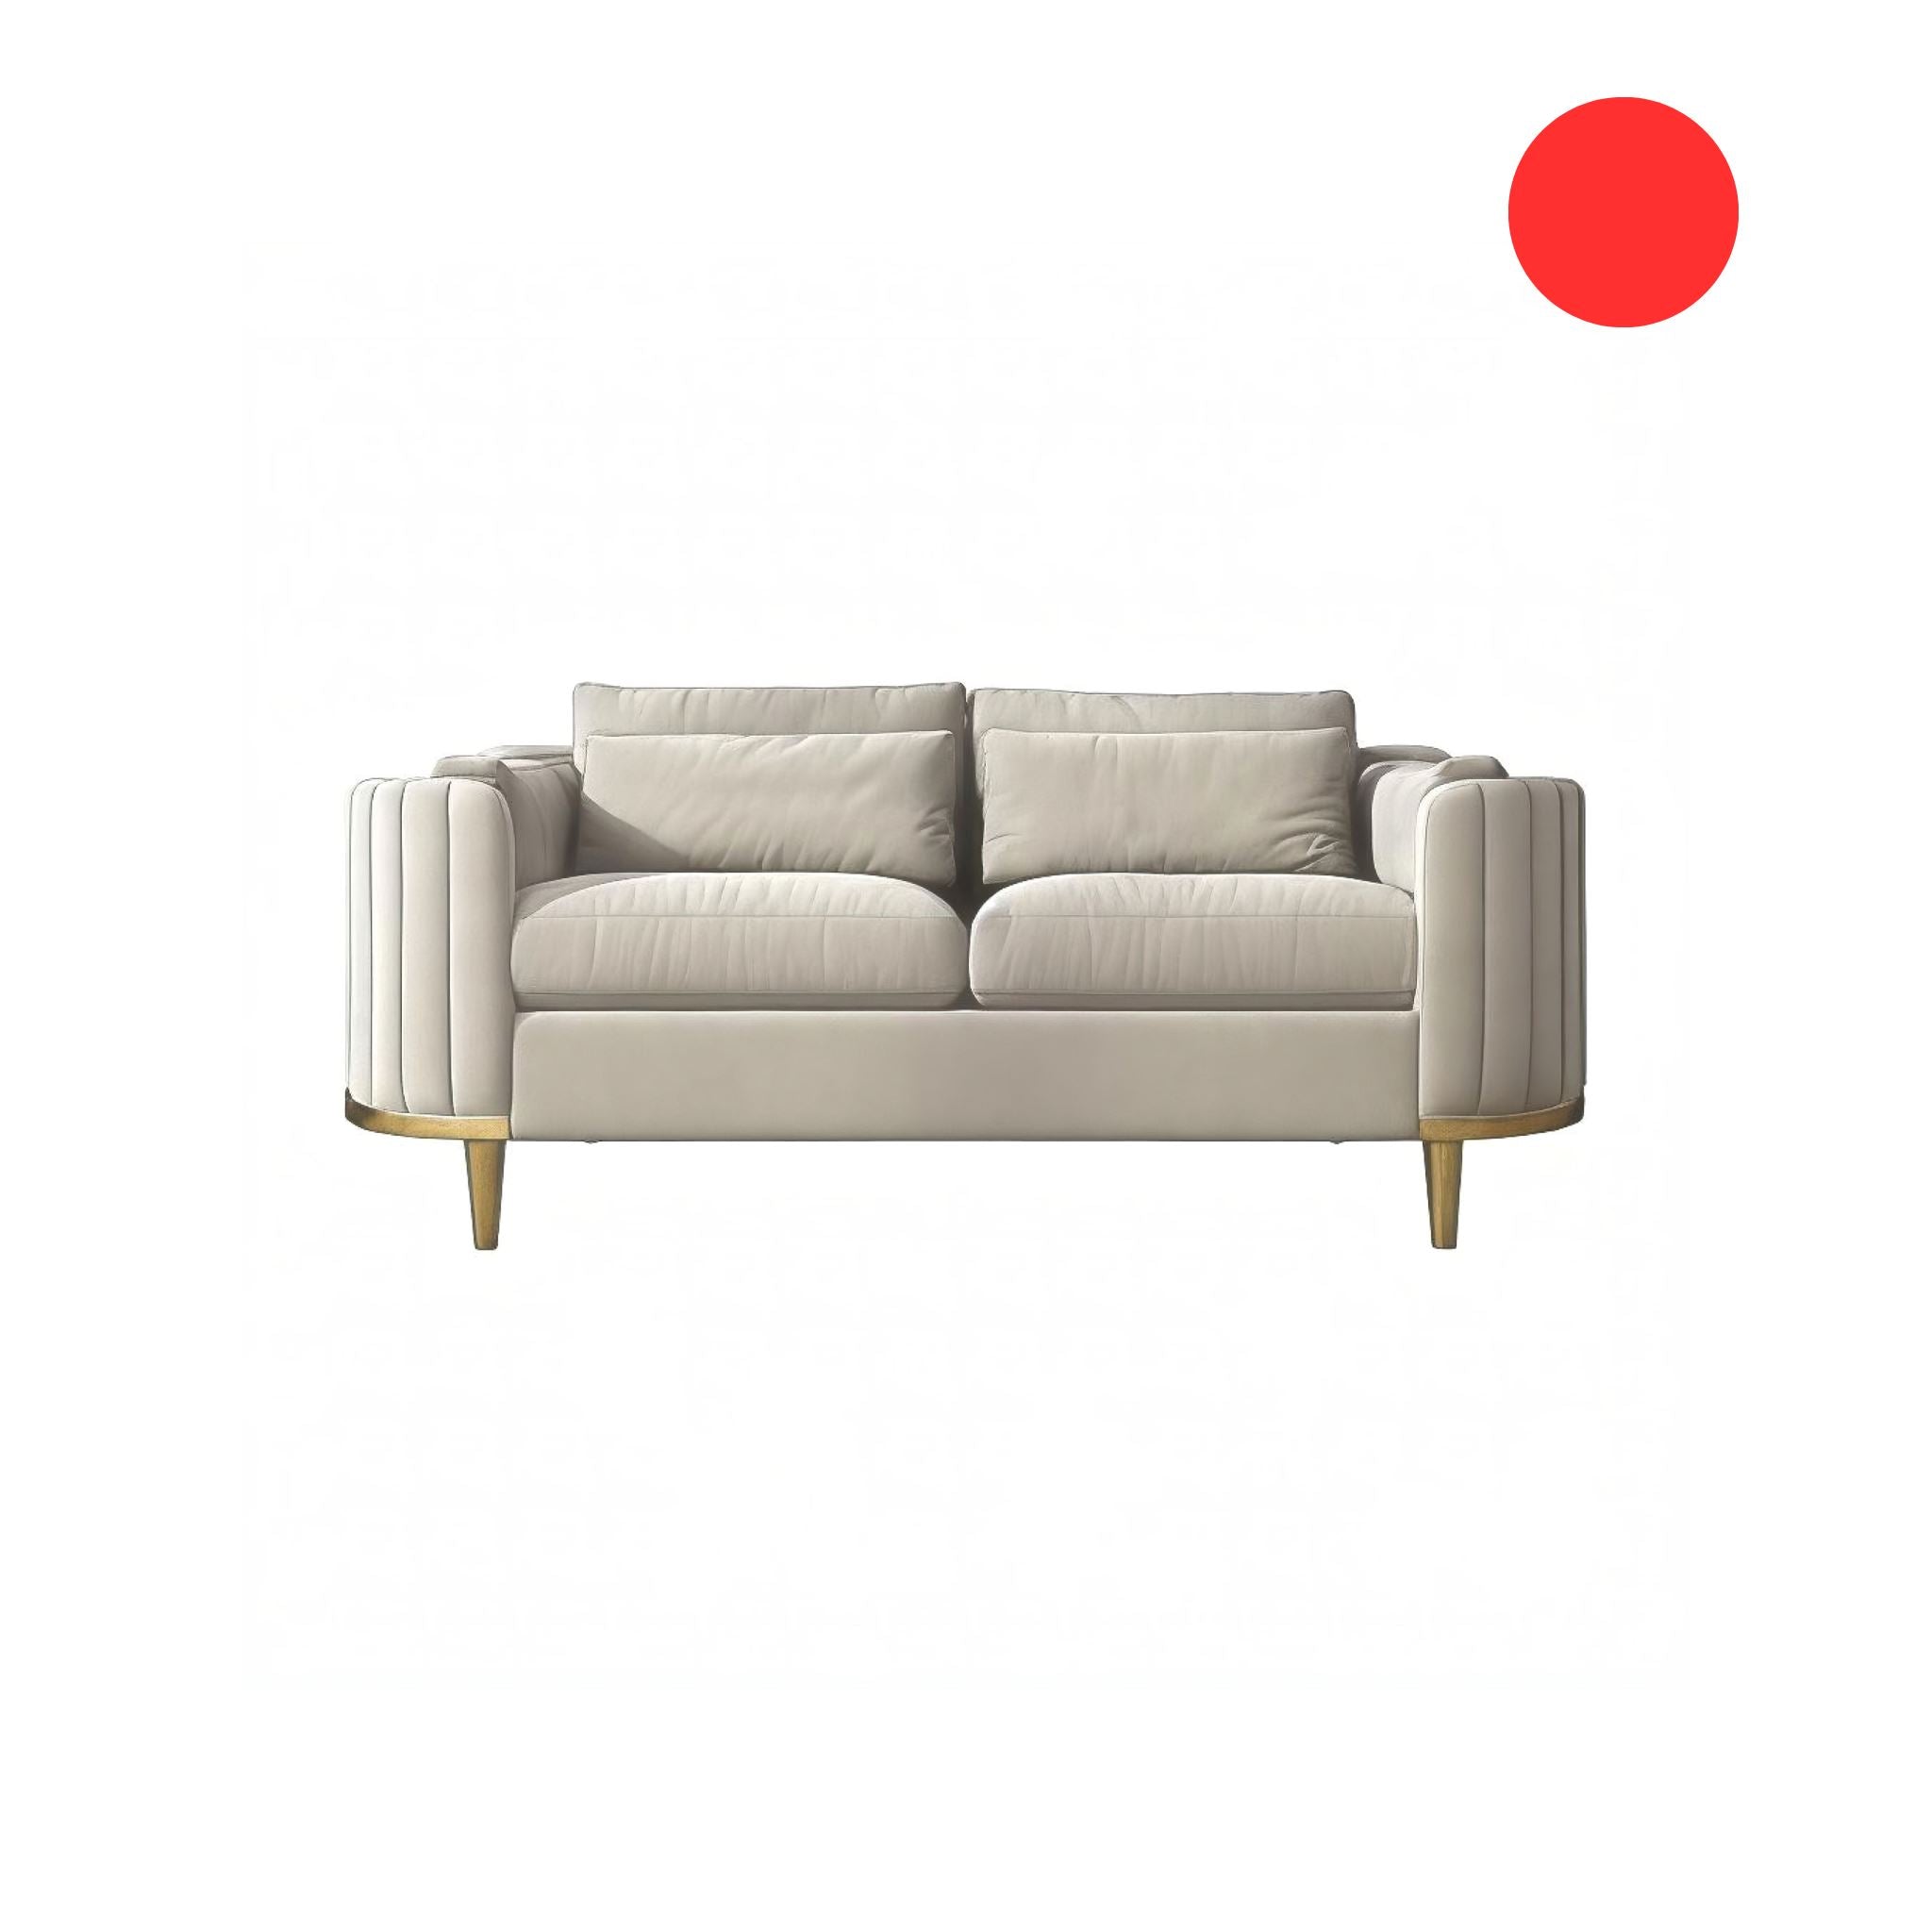 Henri Sofa Collection Sofa Double Seat Red 